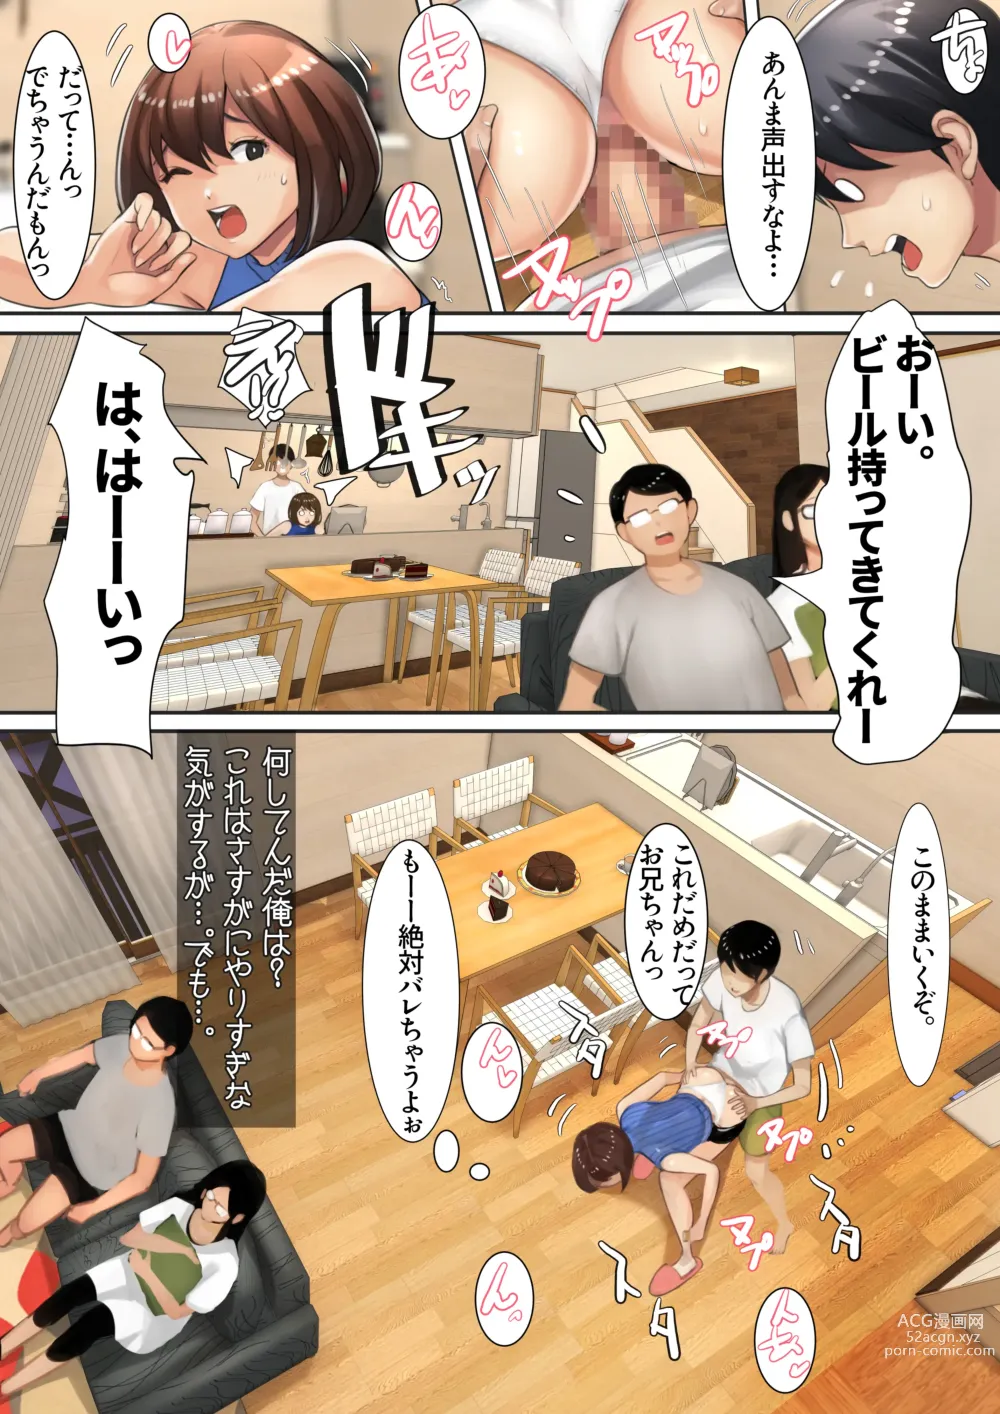 Page 26 of doujinshi Imouto SS Short Story vol.5